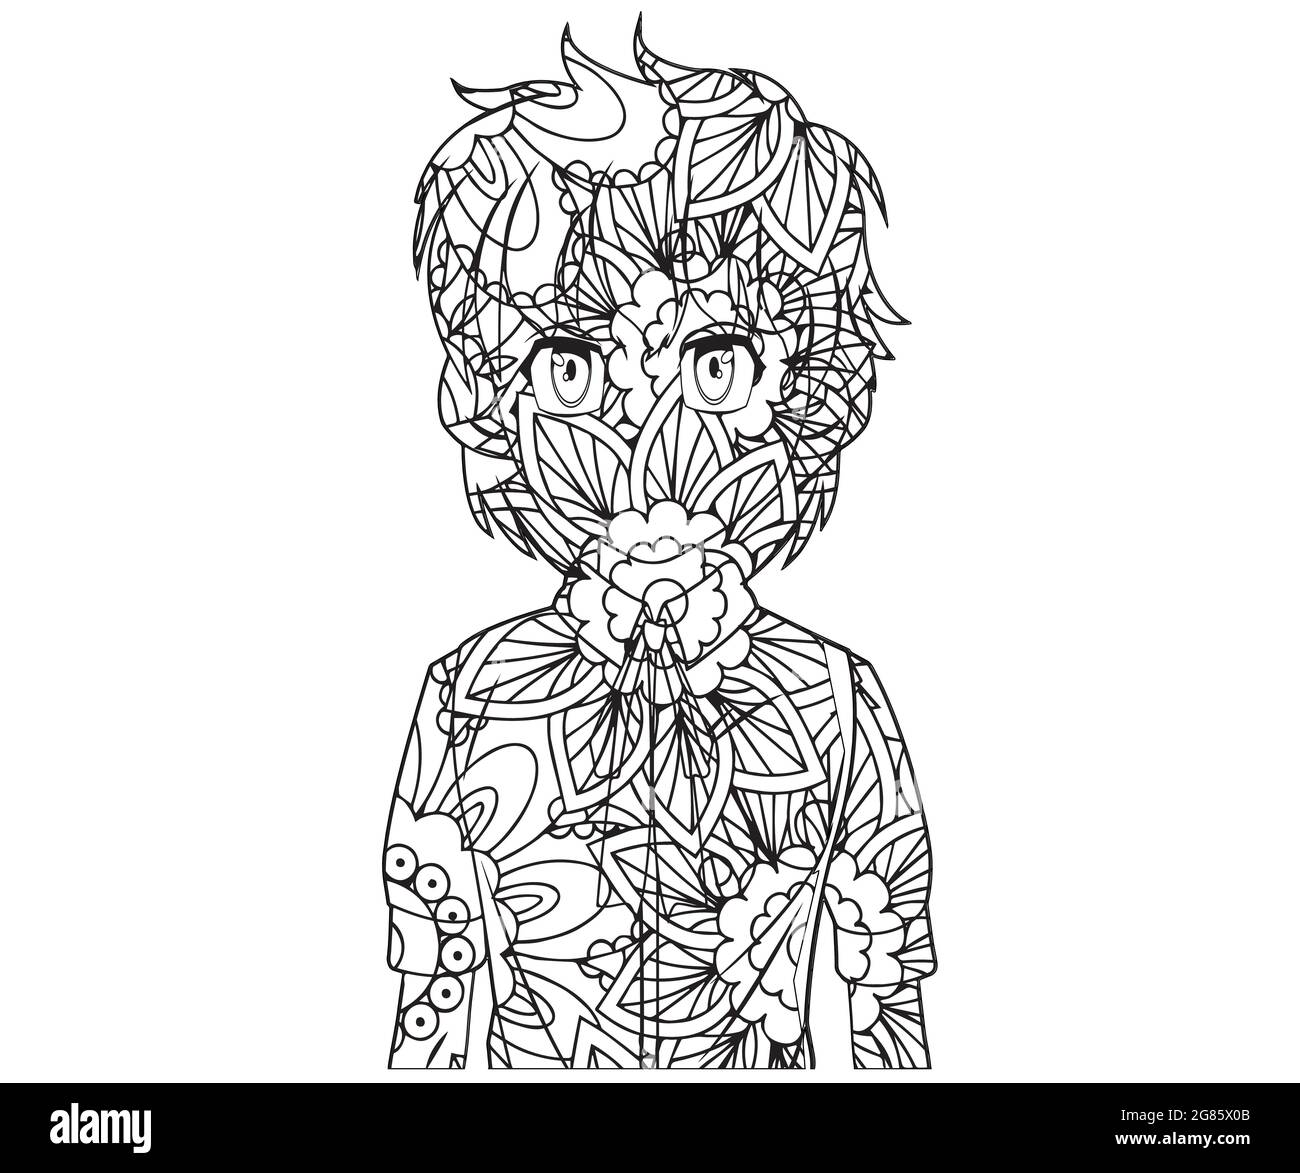 Anime Girl Coloring Page 22562901 Vector Art at Vecteezy